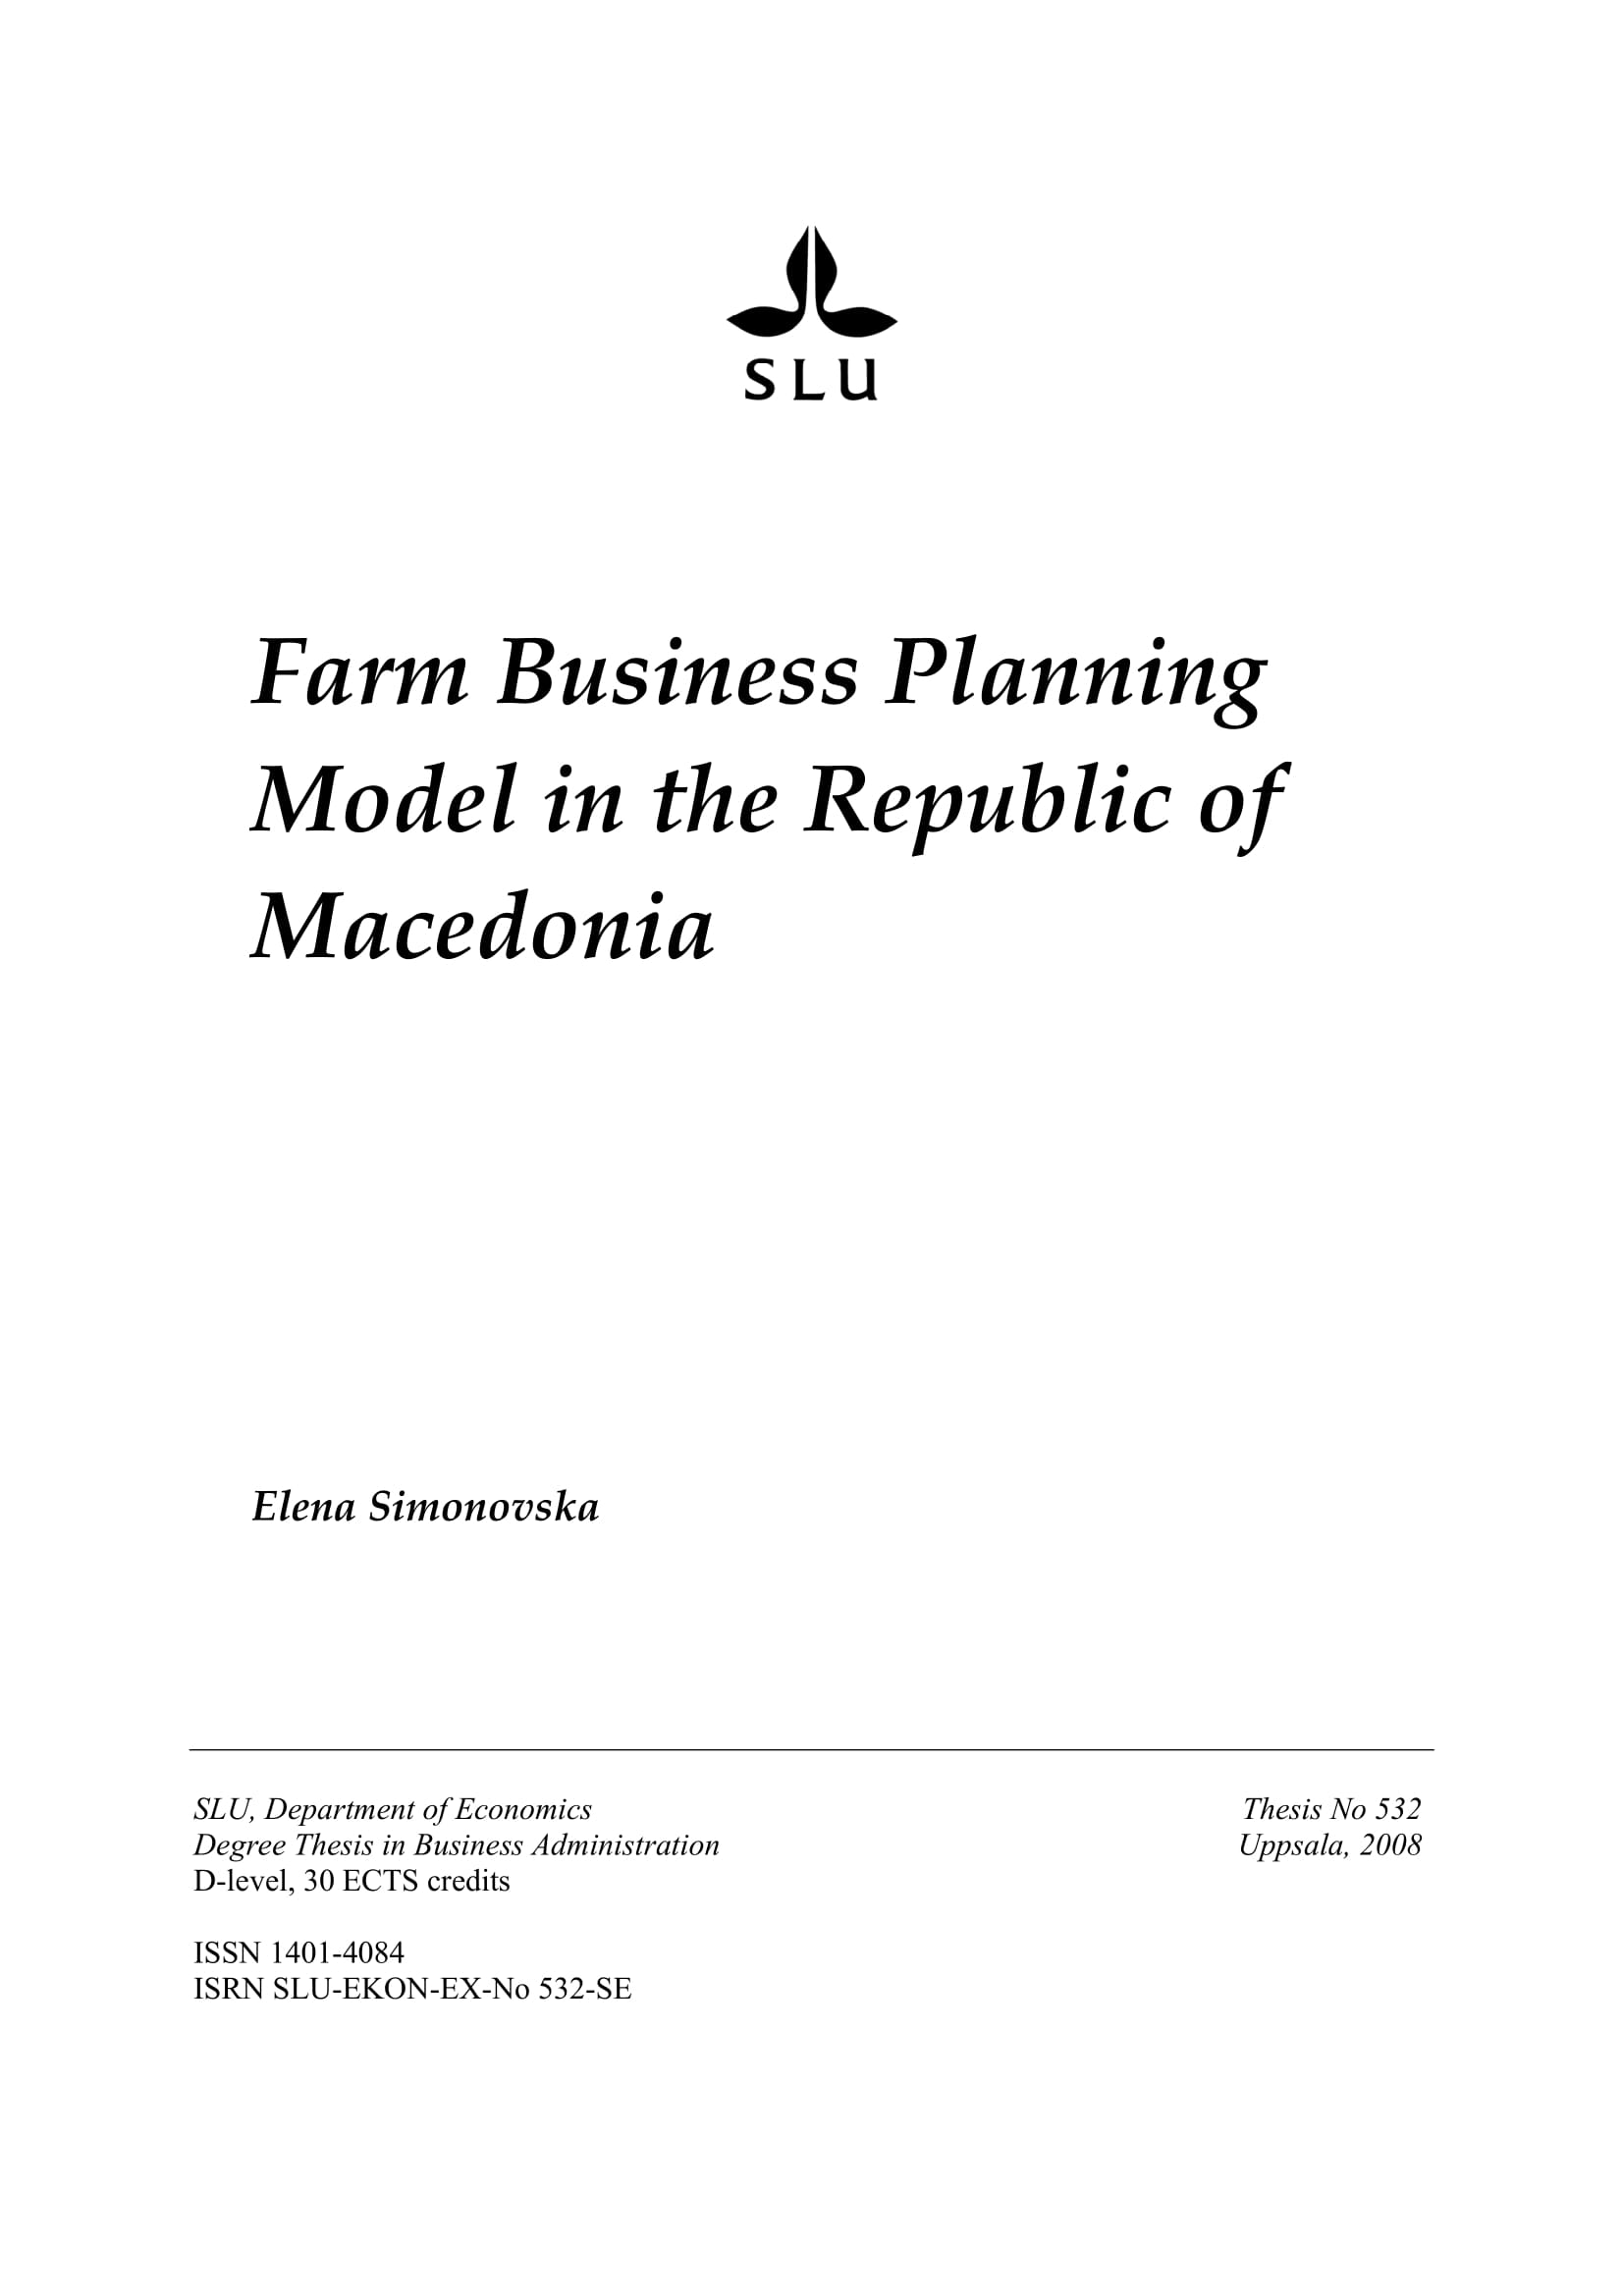 farm business planning model example 01